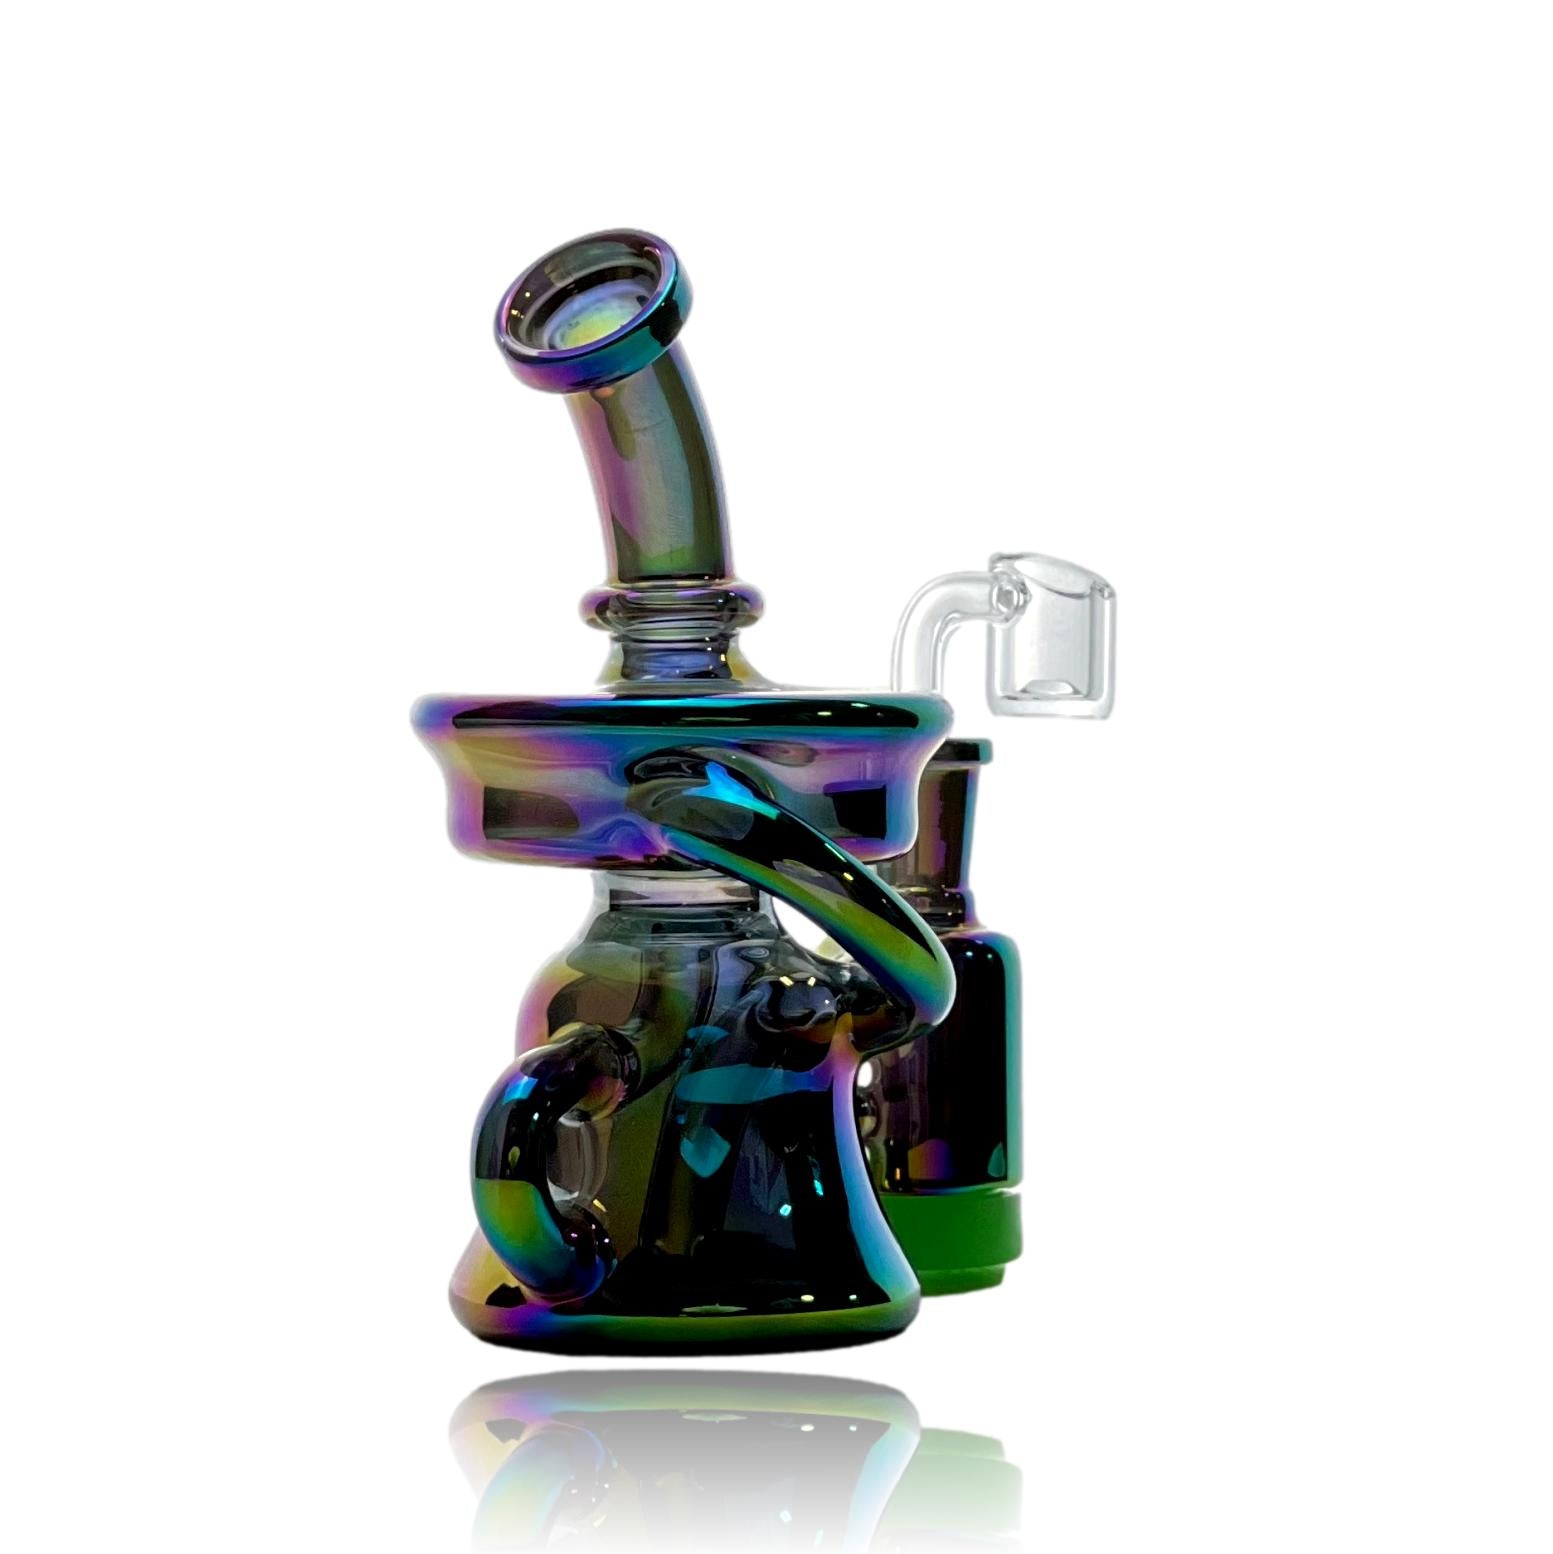 Introducing the Mini Metallic Recycler Dab Rig – Compact Brilliance, Maximum Performance  Unleash the power of concentrated sophistication with our Mini Metallic Recycler Dab Rig, a pocket-sized wonder engineered to redefine the art of dabbing. Crafted with precision and sleek metallic accents, this mini rig boasts maximum efficiency and style for on-the-go enthusiasts who demand the best from their concentrate experie